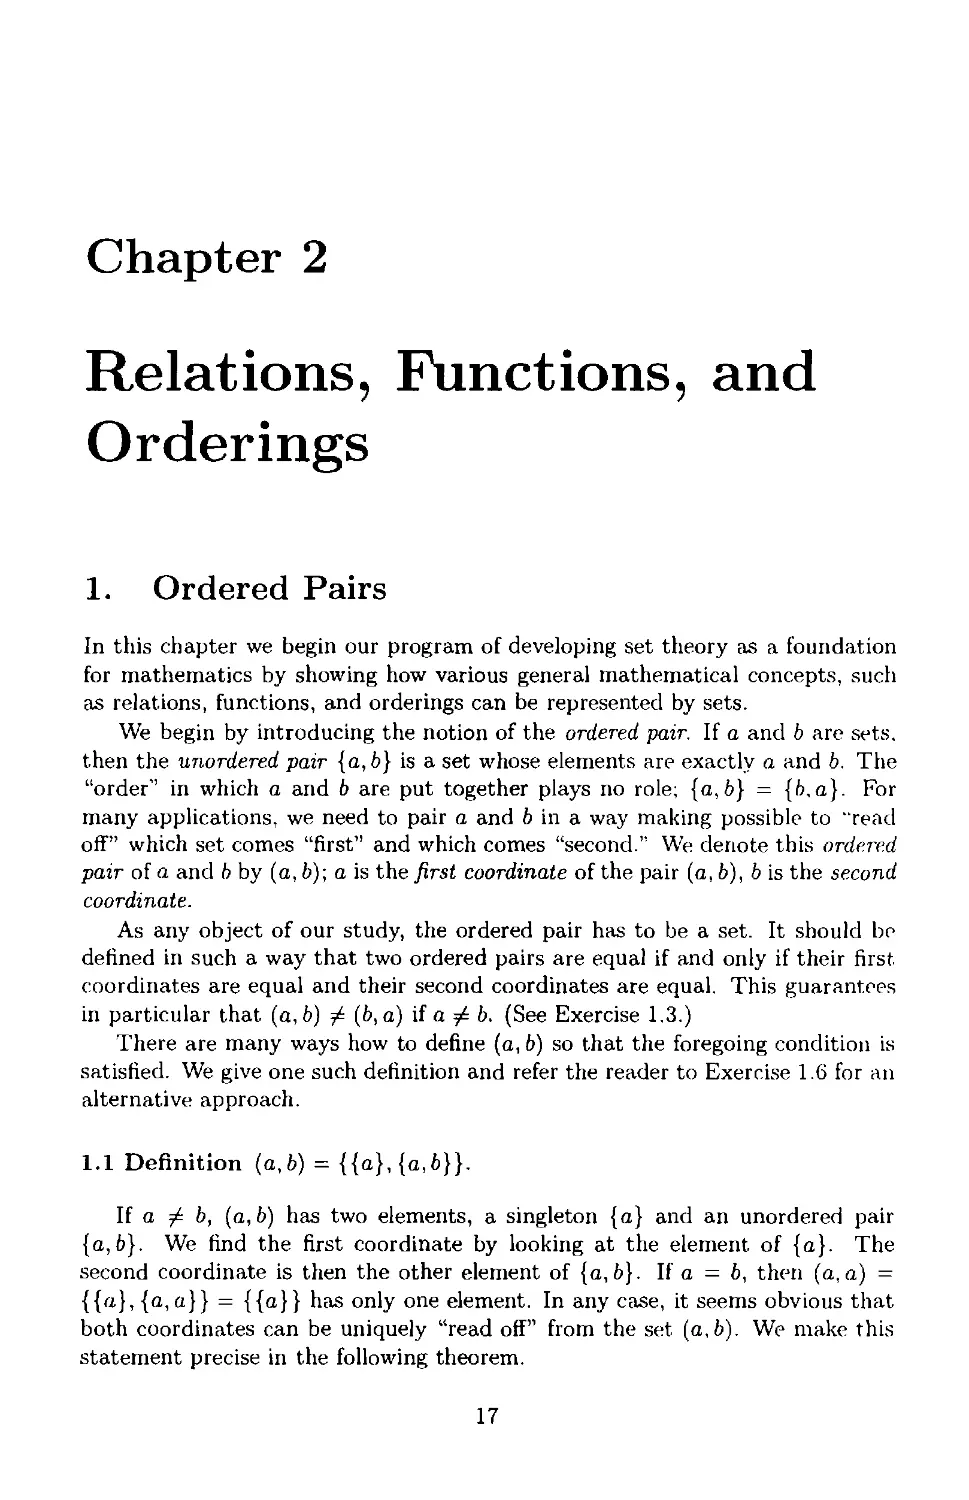 Chapter 2 Relations, Functions, and Orderings